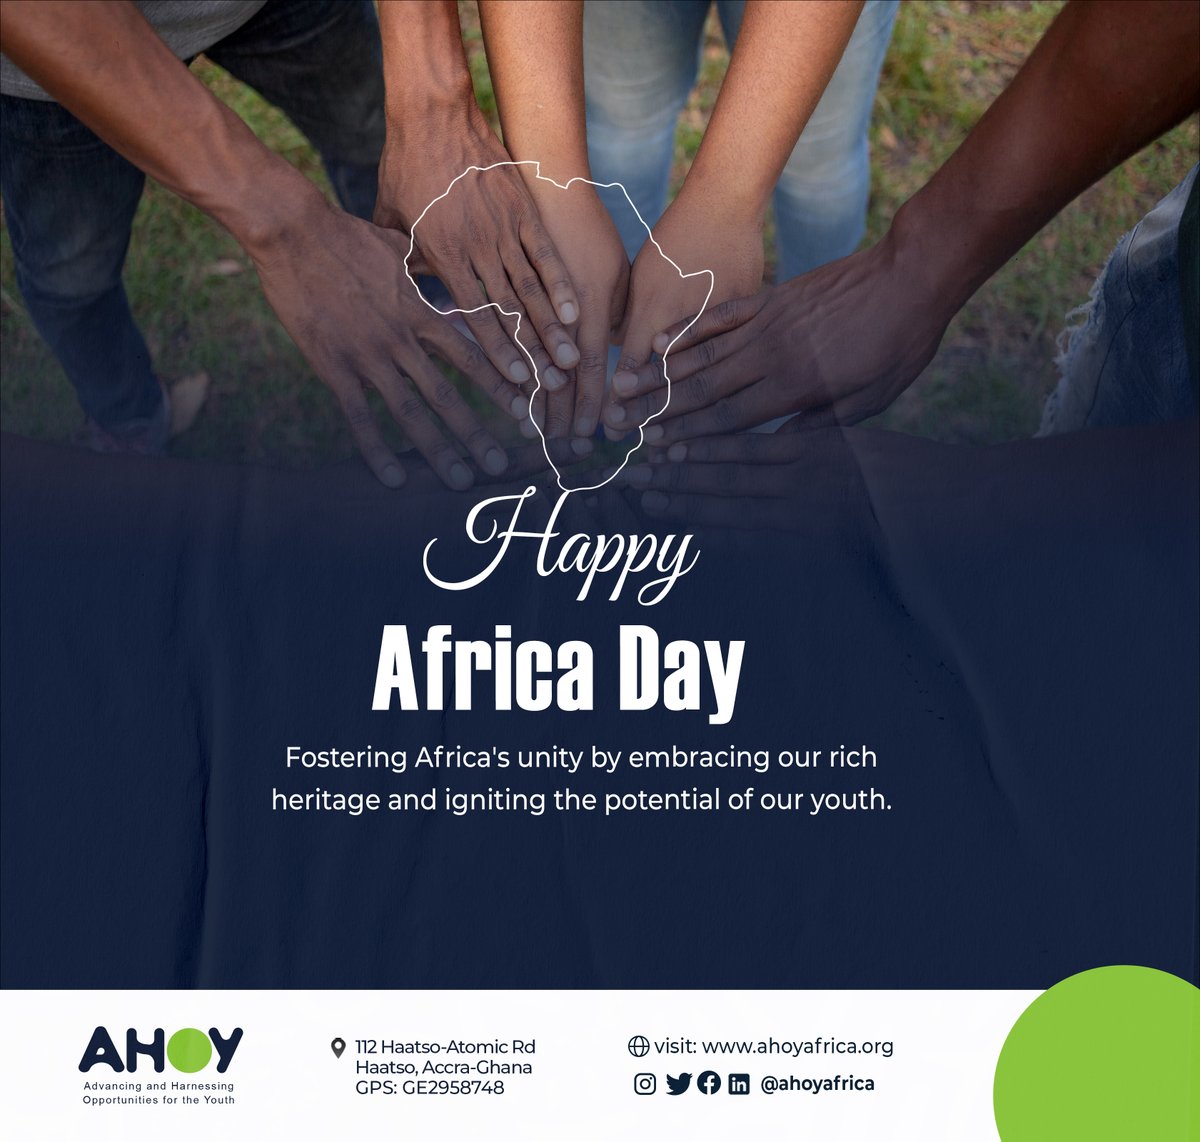 African and proud! To endless opportunities for the African Youth. Happy Africa Day.
#youthadvocacy #youthpolicy #youthopportunities #youthemployment #AfricaDay2023 #ahoyafrica